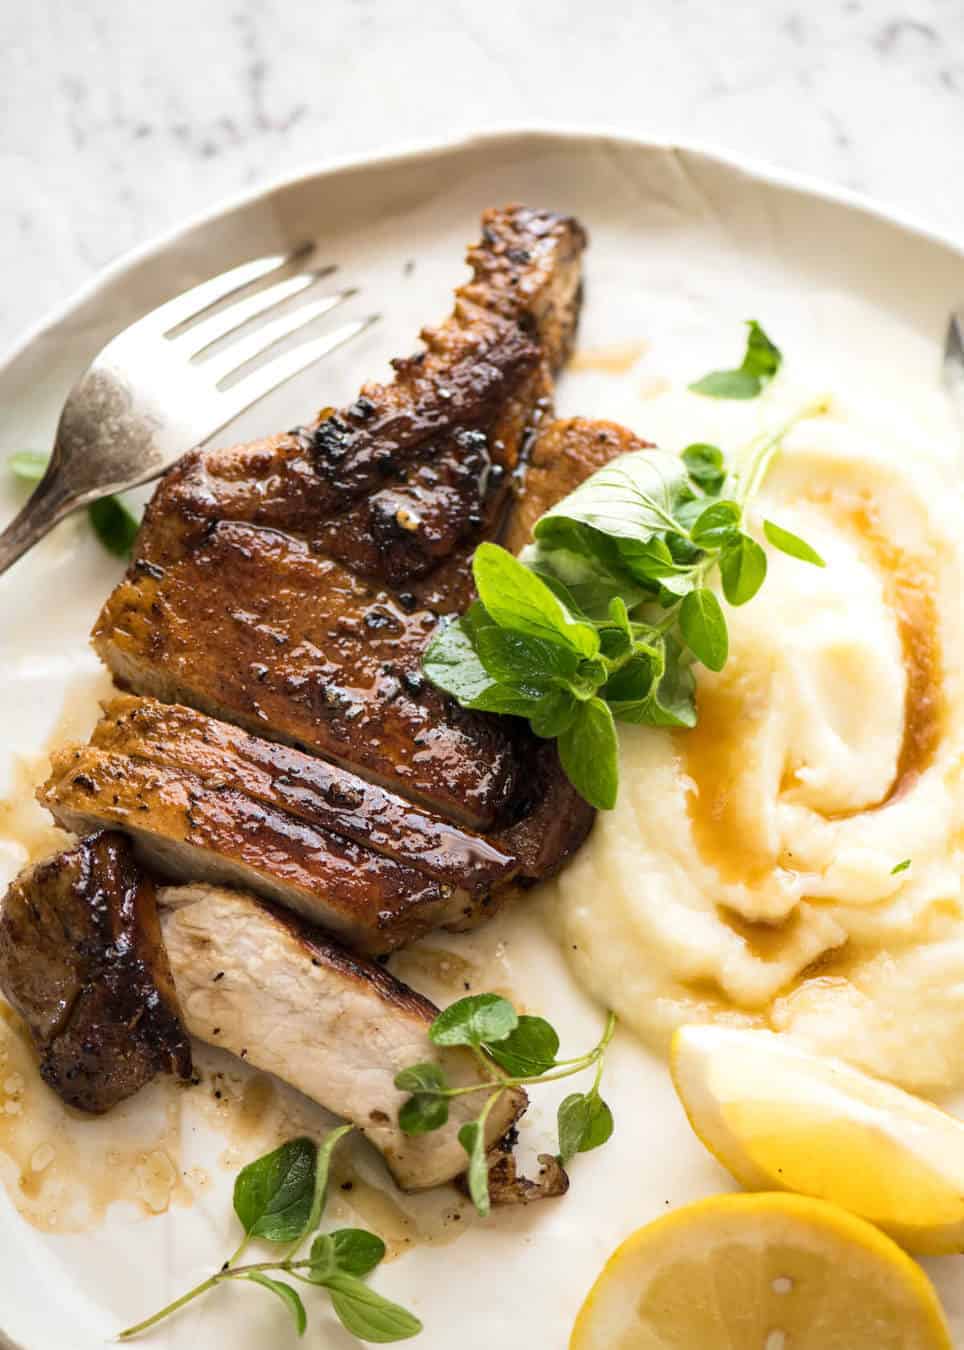 Lemon Garlic Marinated Grilled Pork Chops on a white plate with mashed potato on the side.